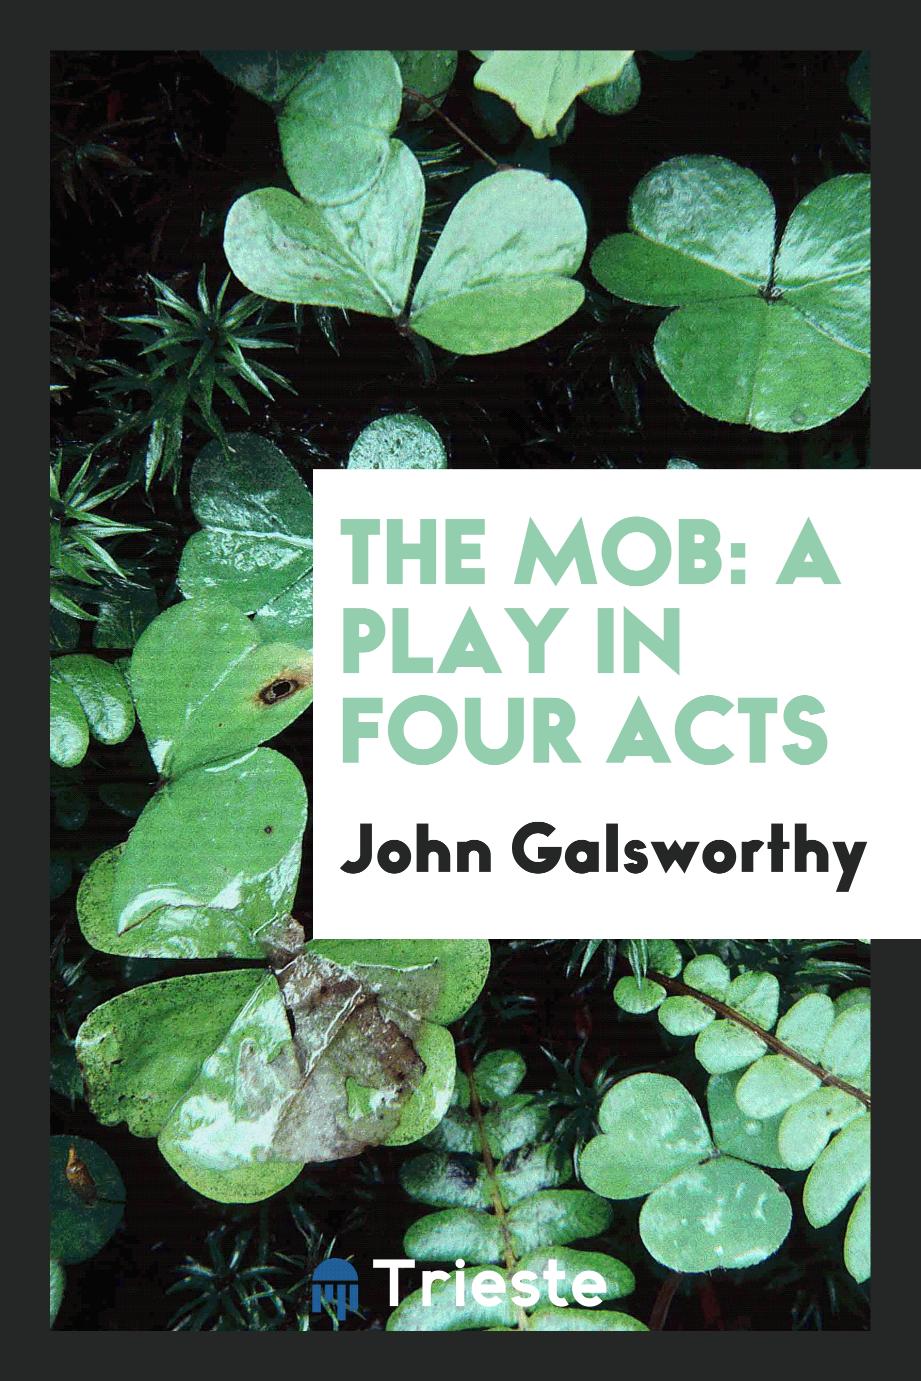 The mob: a play in four acts